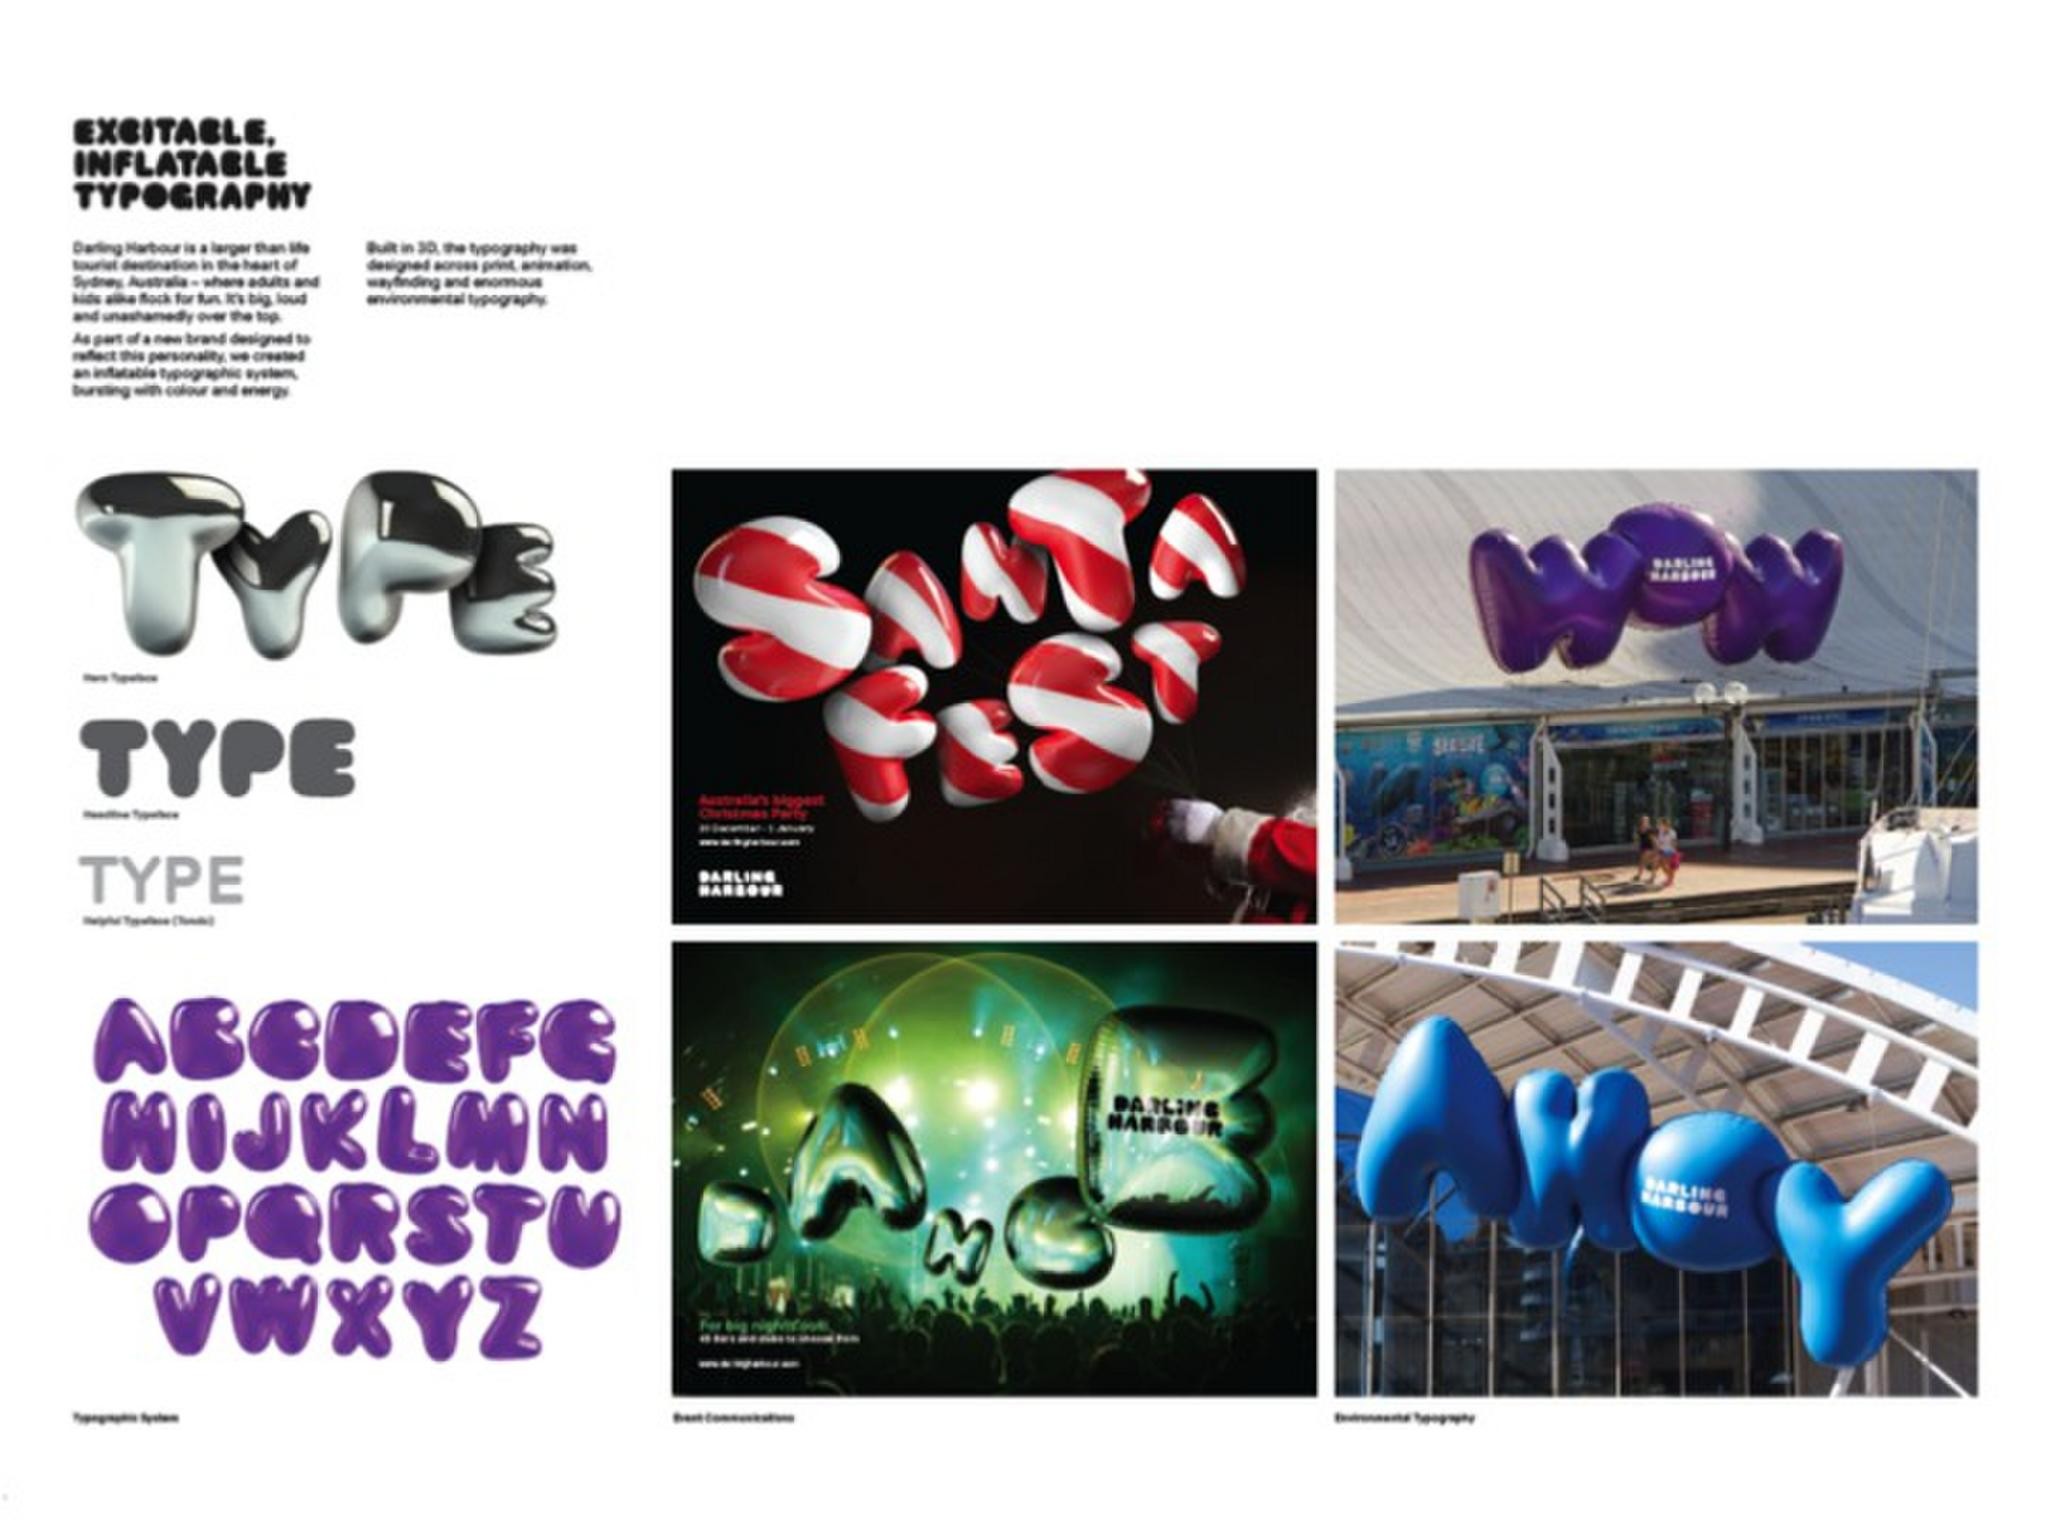 EXCITABLE, INFLATABLE TYPOGRAPHY